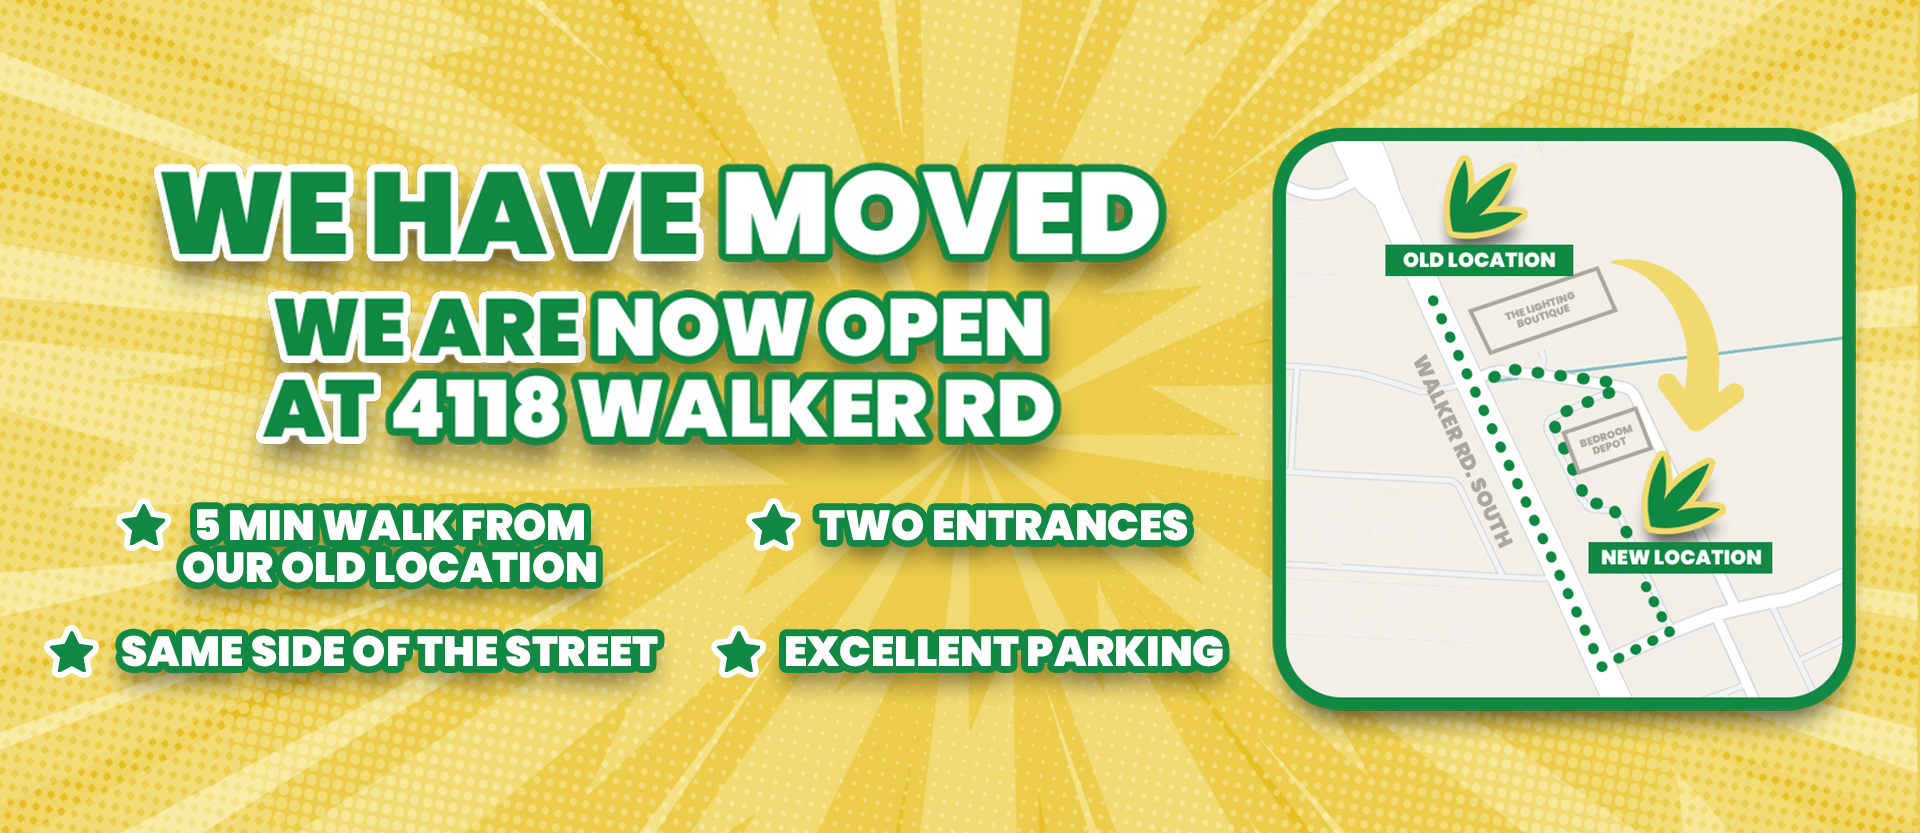 Our Walker Road Location is Moving Soon!